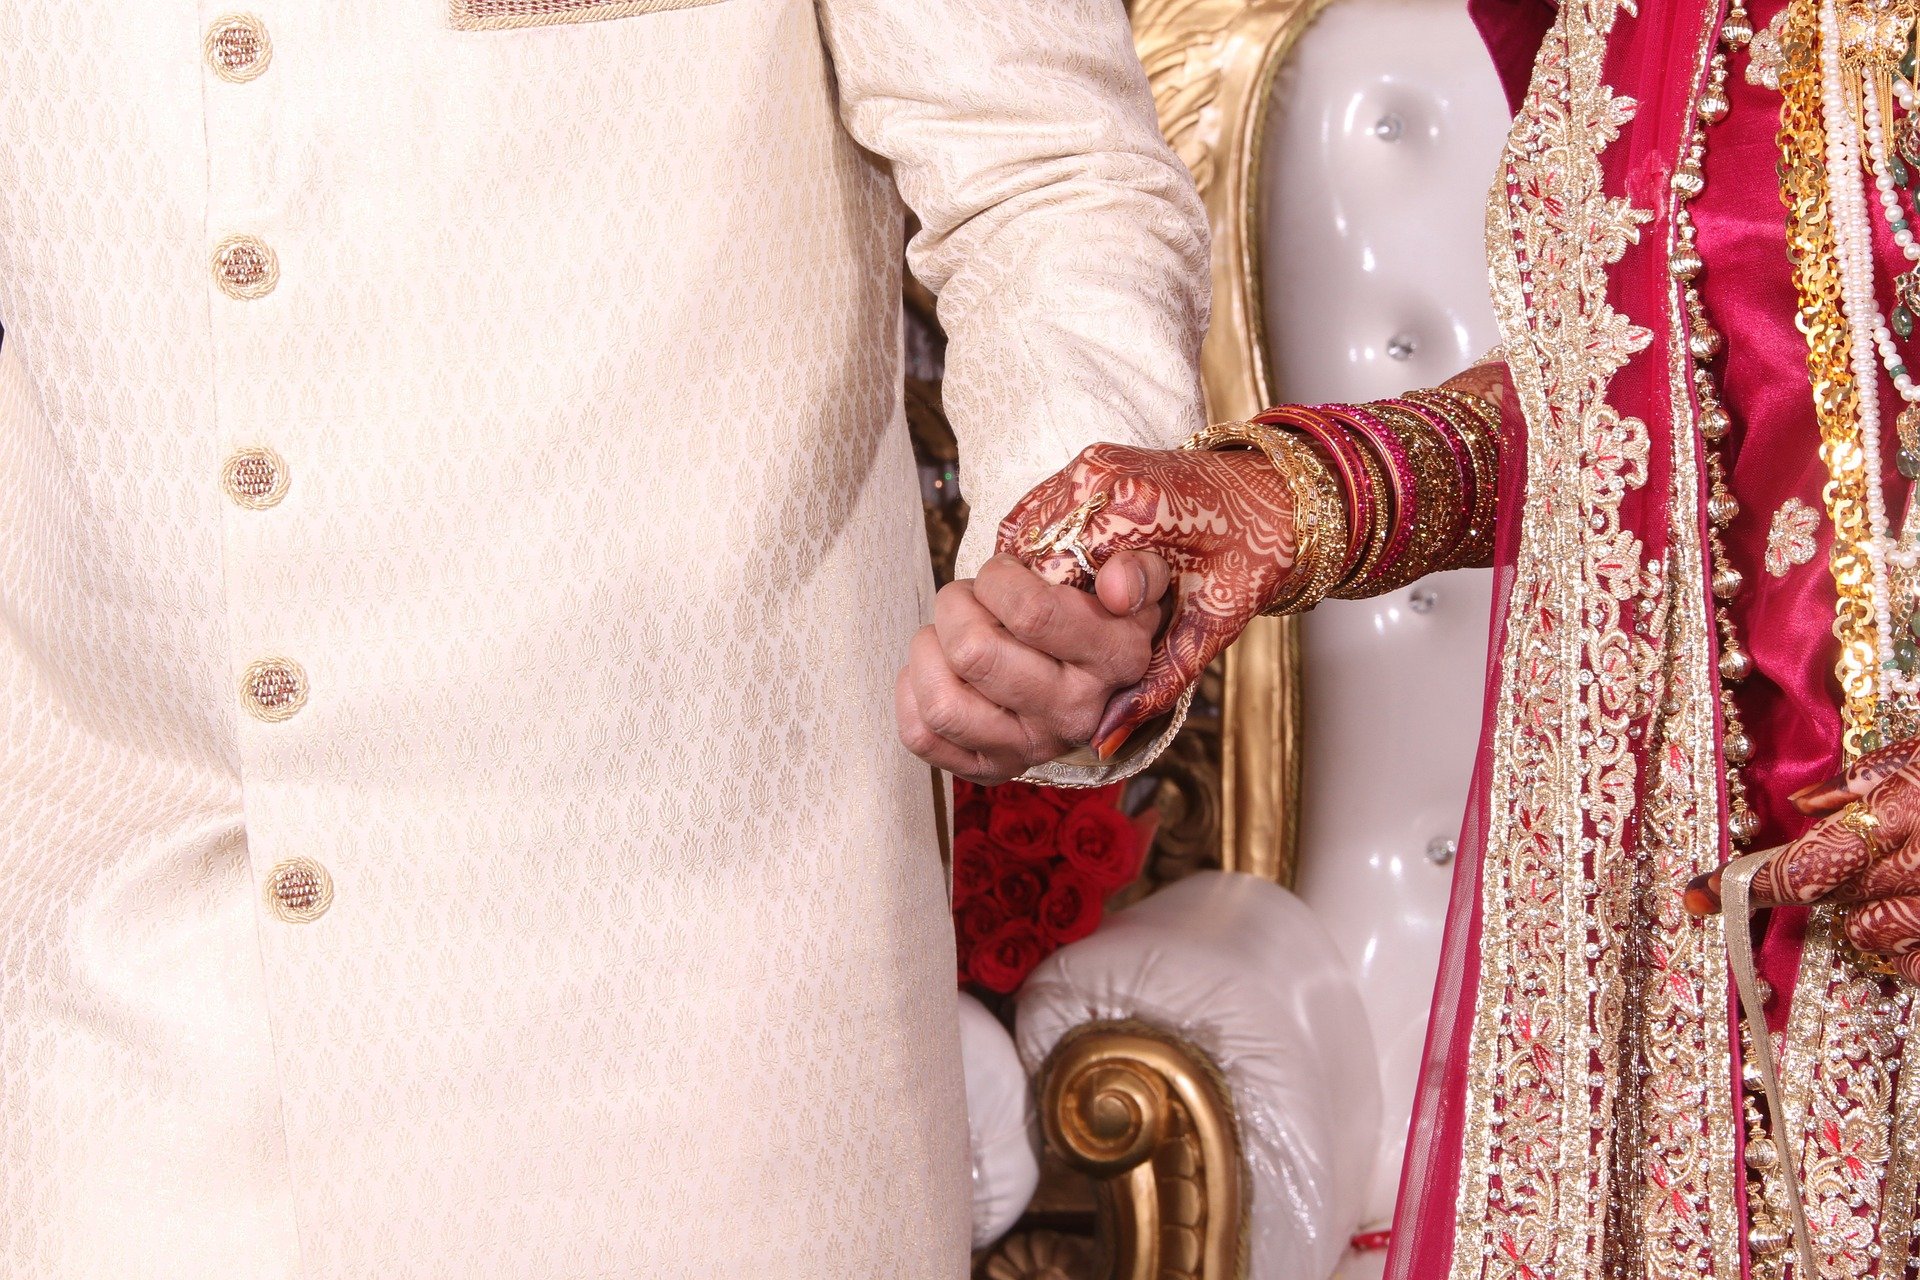 How Vibrant Cultures Celebrate Their Wedding Day Differently